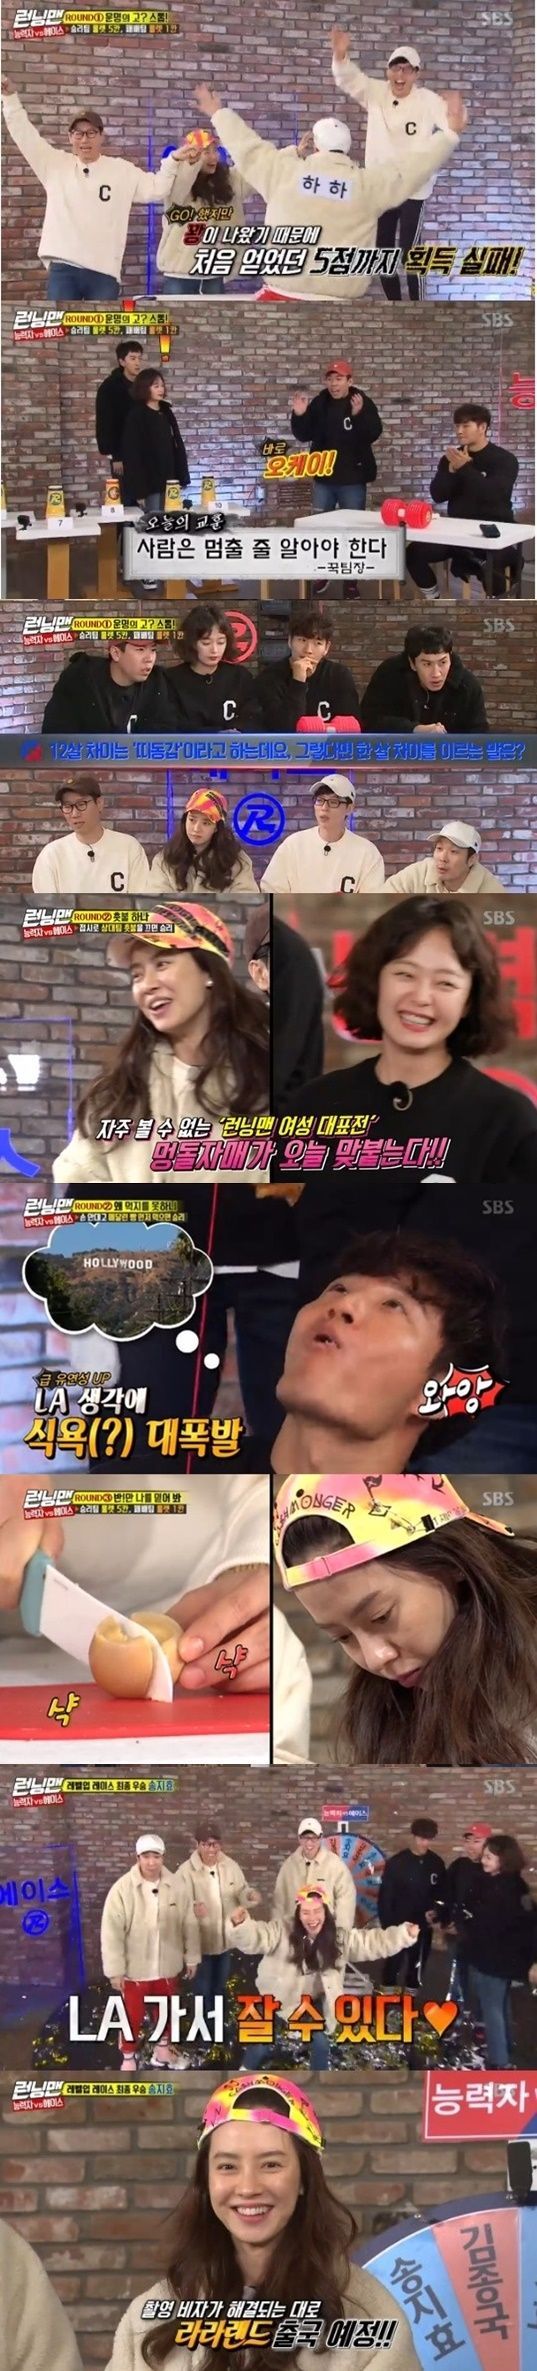 SBS Running Man ratings rose vertically in the confrontation between Ace and Ace.According to Nielsen Korea, the ratings agency, Running Man, which was broadcast on the 10th, recorded an average audience rating of 5.9% and the second part recorded 8.1% (based on the audience rating of households in the Seoul metropolitan area), which was 2.2% higher than last week.The highest audience rating per minute rose to 9.8%, which is close to 10%, and the 2049 target audience rating, which is an important indicator of major advertising officials, ranked first in the same time zone with 5.4% (based on the audience rating of two parts).The show was interesting with the face-to-face confrontation between Ace Song Ji-hyo, the winner of the first project Race Level-Up Race in the New Year, and Kim Jong-kook, the talented person.The winner was able to pick one of the team members and get the luck of going on a trip to LA together, while Song Ji-hyo and Kim Jong-kook announced their respective LA travel plans.As a team, Song Ji-hyo, Yoo Jae-Suk, Ji Suk-jin, Haha, and the talented team consisted of Kim Jong-kook, Lee Kwang-soo, Yang Se-chan and Jeon So-min.The three-round showdown was a roulette-kan set up following round-by-round victories, and each team was tense with a fierce confrontation. Round 1 Go of Destiny? Stop!Yoo Jae-Suk and Lee Kwang-soos Bangson Parade followed, but the Ace team won in the performance of Goldson Song Ji-hyo.The second round was a game victory for the Ace team, but the Ace team did not overturn the Ace teams dominance, and the third round also took the Ace team victory.Song Ji-hyo, who took more roulette Khan, turned roulette into a final showdown with Kim Jong-kook, and Roulette stopped in Song Ji-hyos name.The scene jumped to 9.8% of the highest audience rating per minute, taking the best one minute.